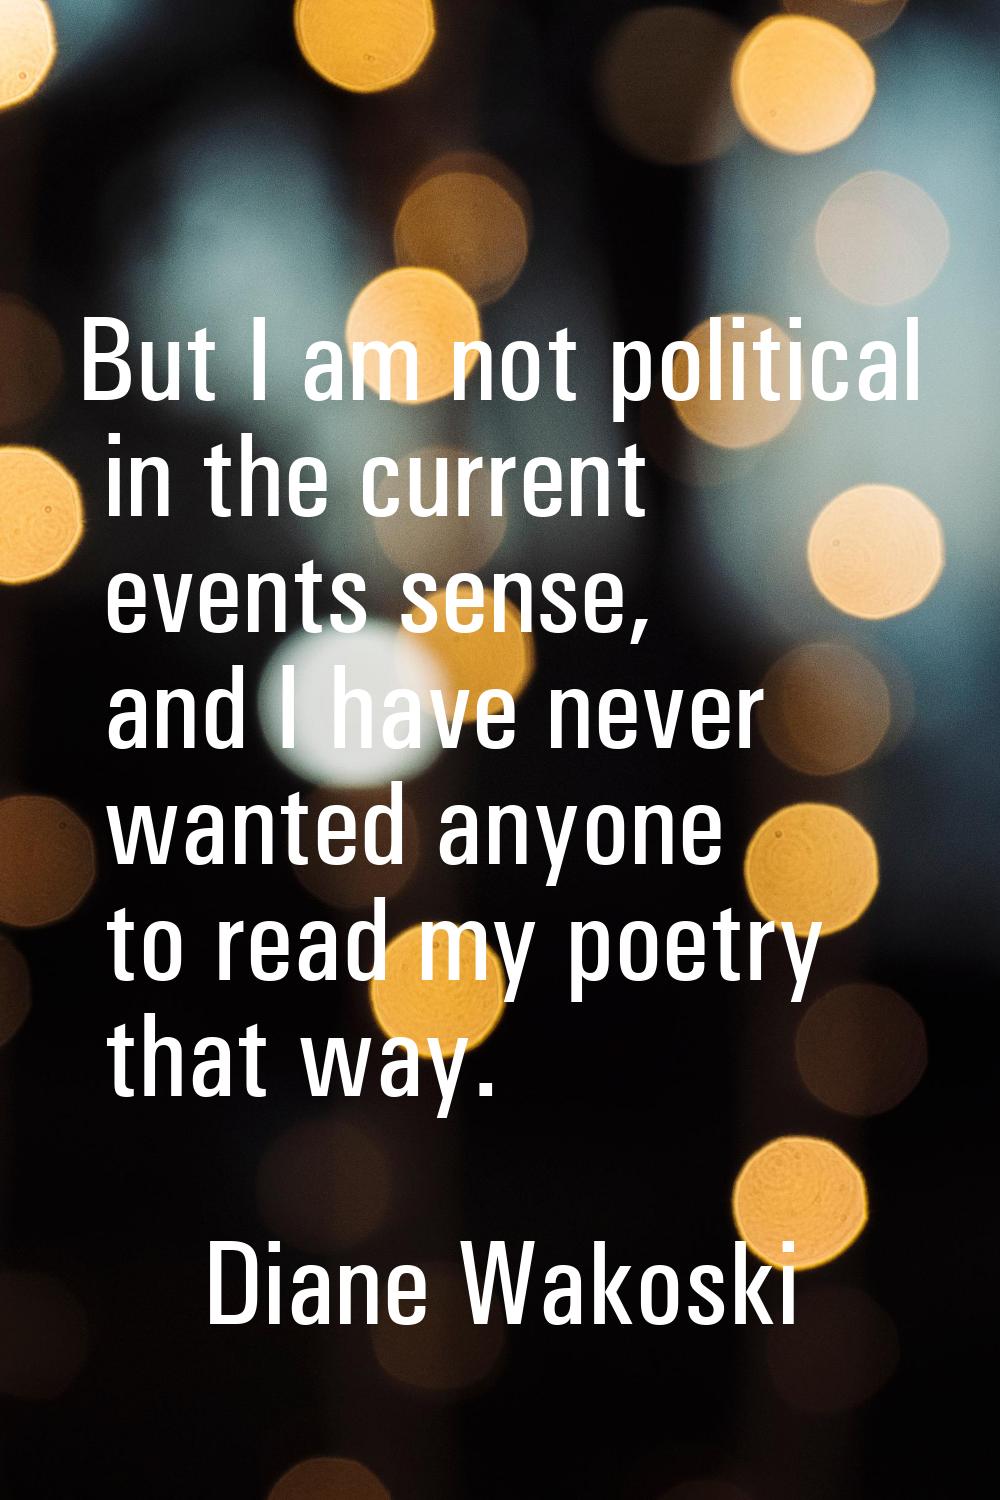 But I am not political in the current events sense, and I have never wanted anyone to read my poetr